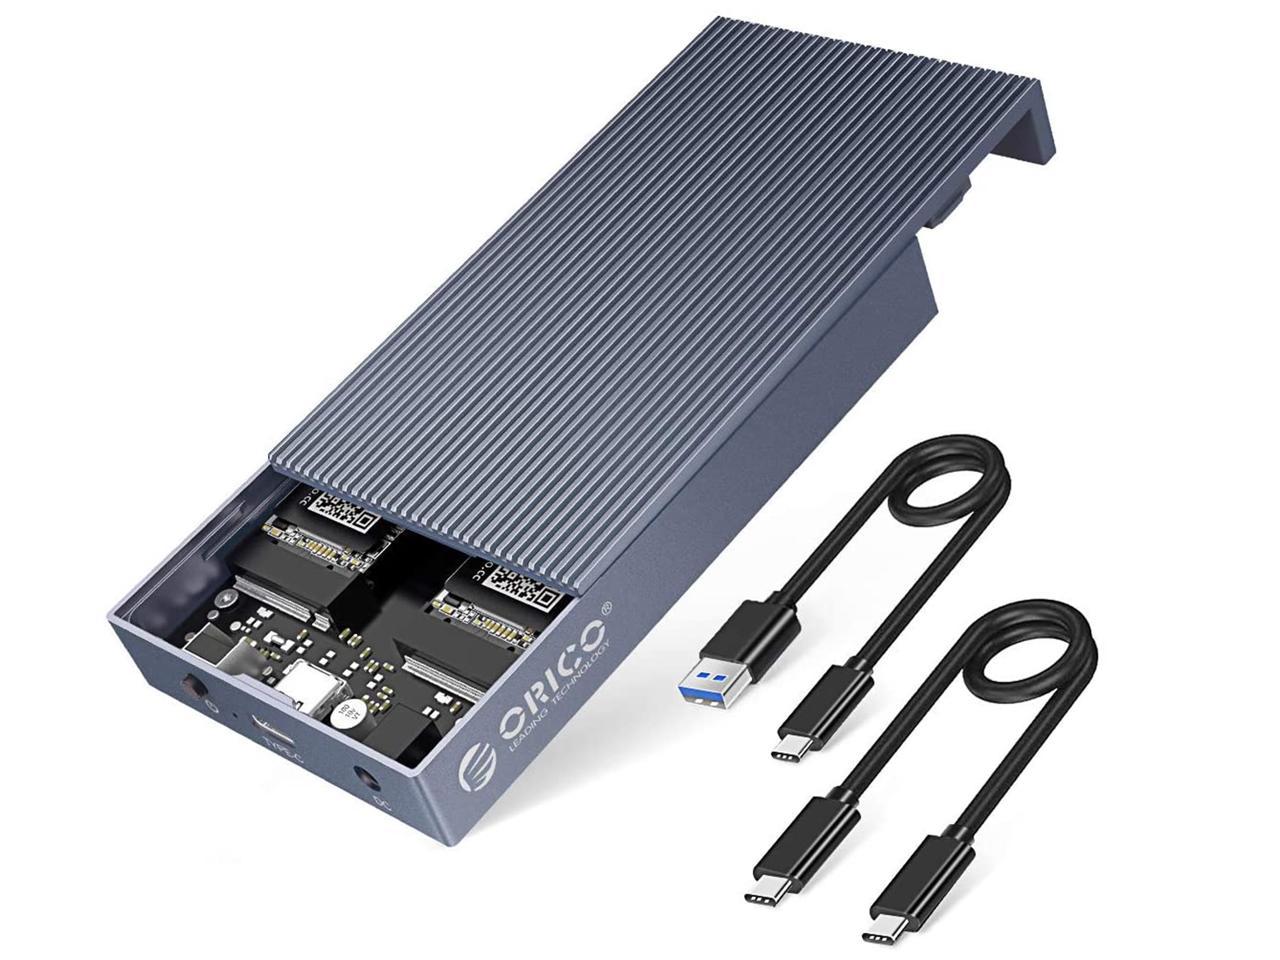 SSD Not Included ORICO Thunderbolt 3 NVME Enclosure Intel Officially Certification 40Gbps Portable External Enclosure PCI-e to M-Key Aluminum Case Only for 2280 M.2 NVME SSD Up to 2TB